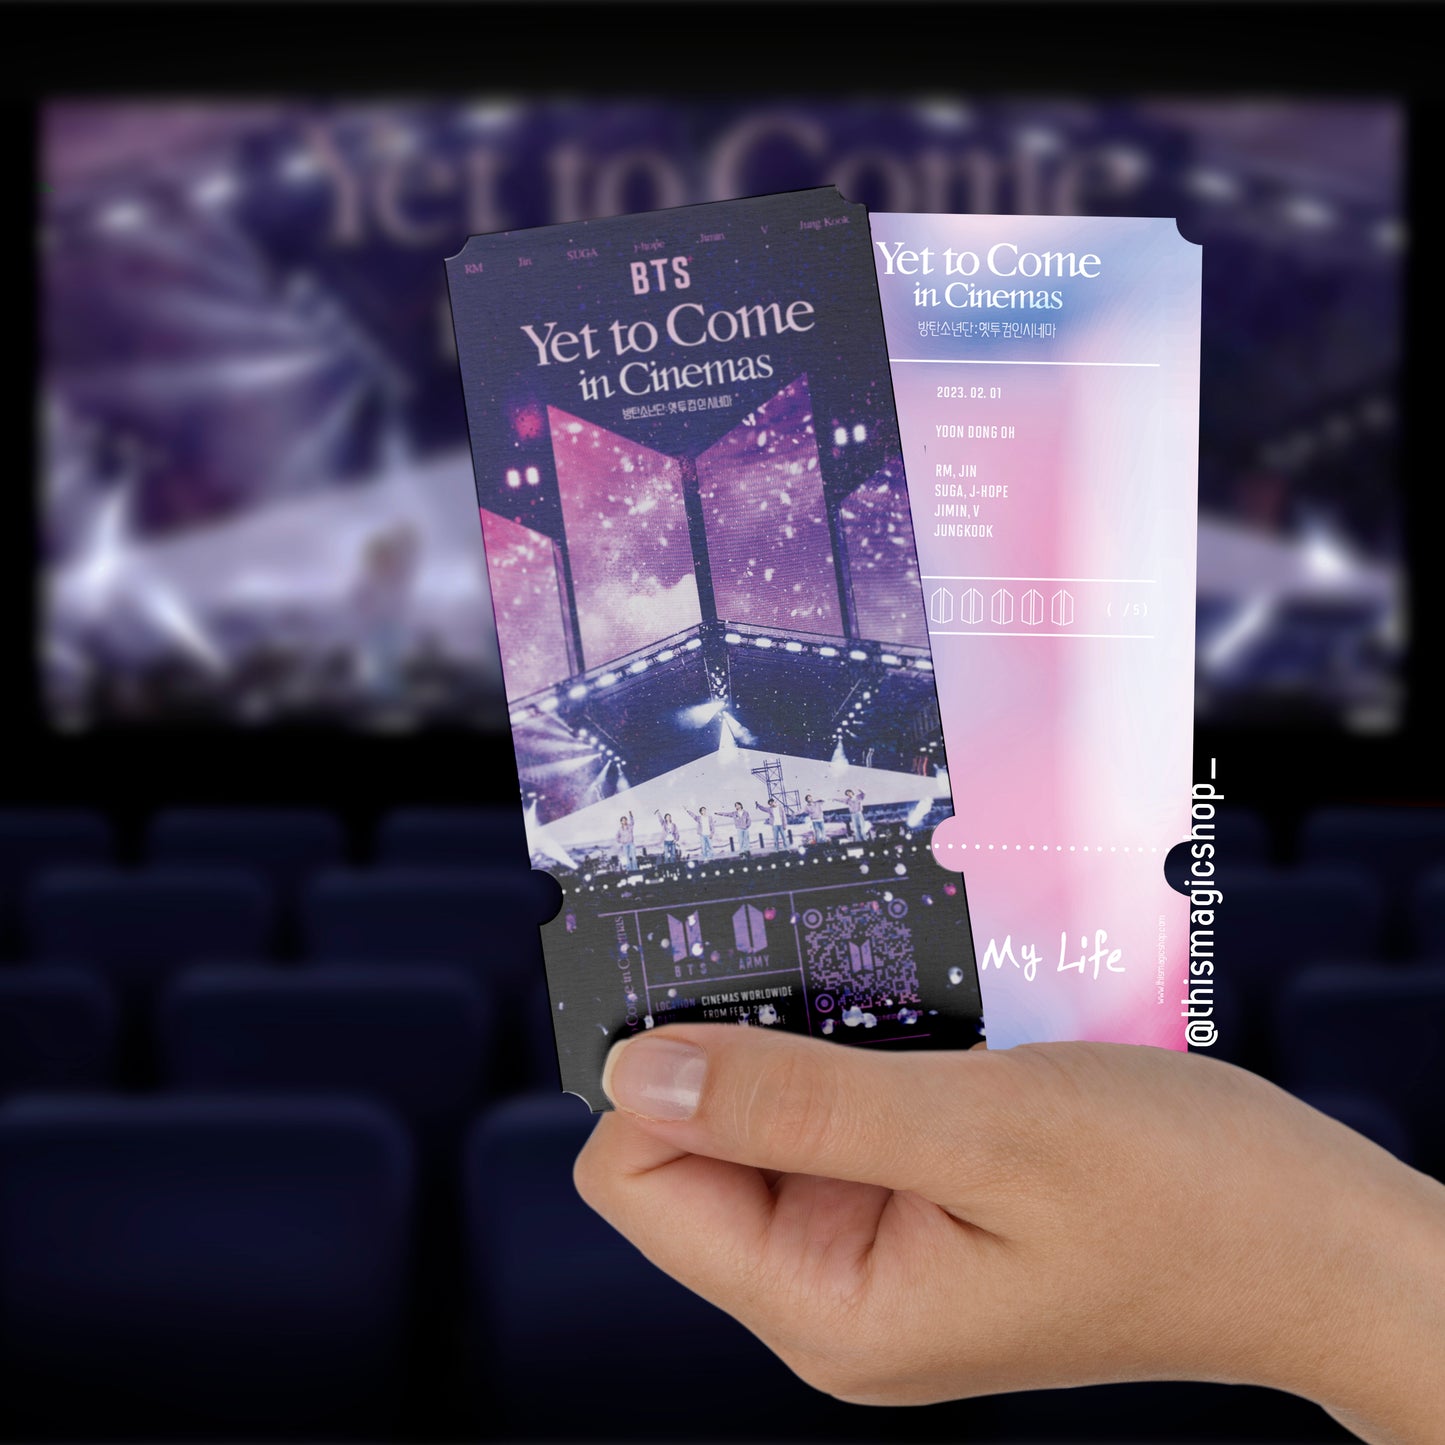 BTS Yet to come in Cinema TICKET Busan commemorative ticket streaming in person concert